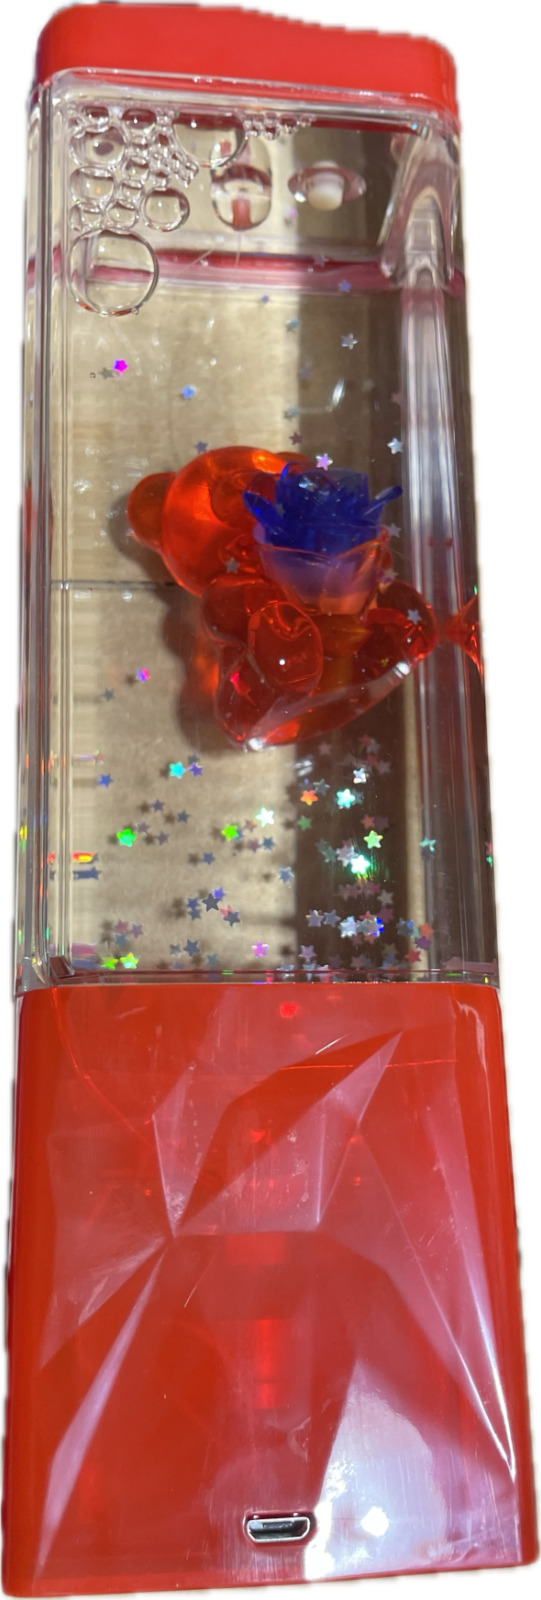 Red Volcano Lava Lamp with Bear